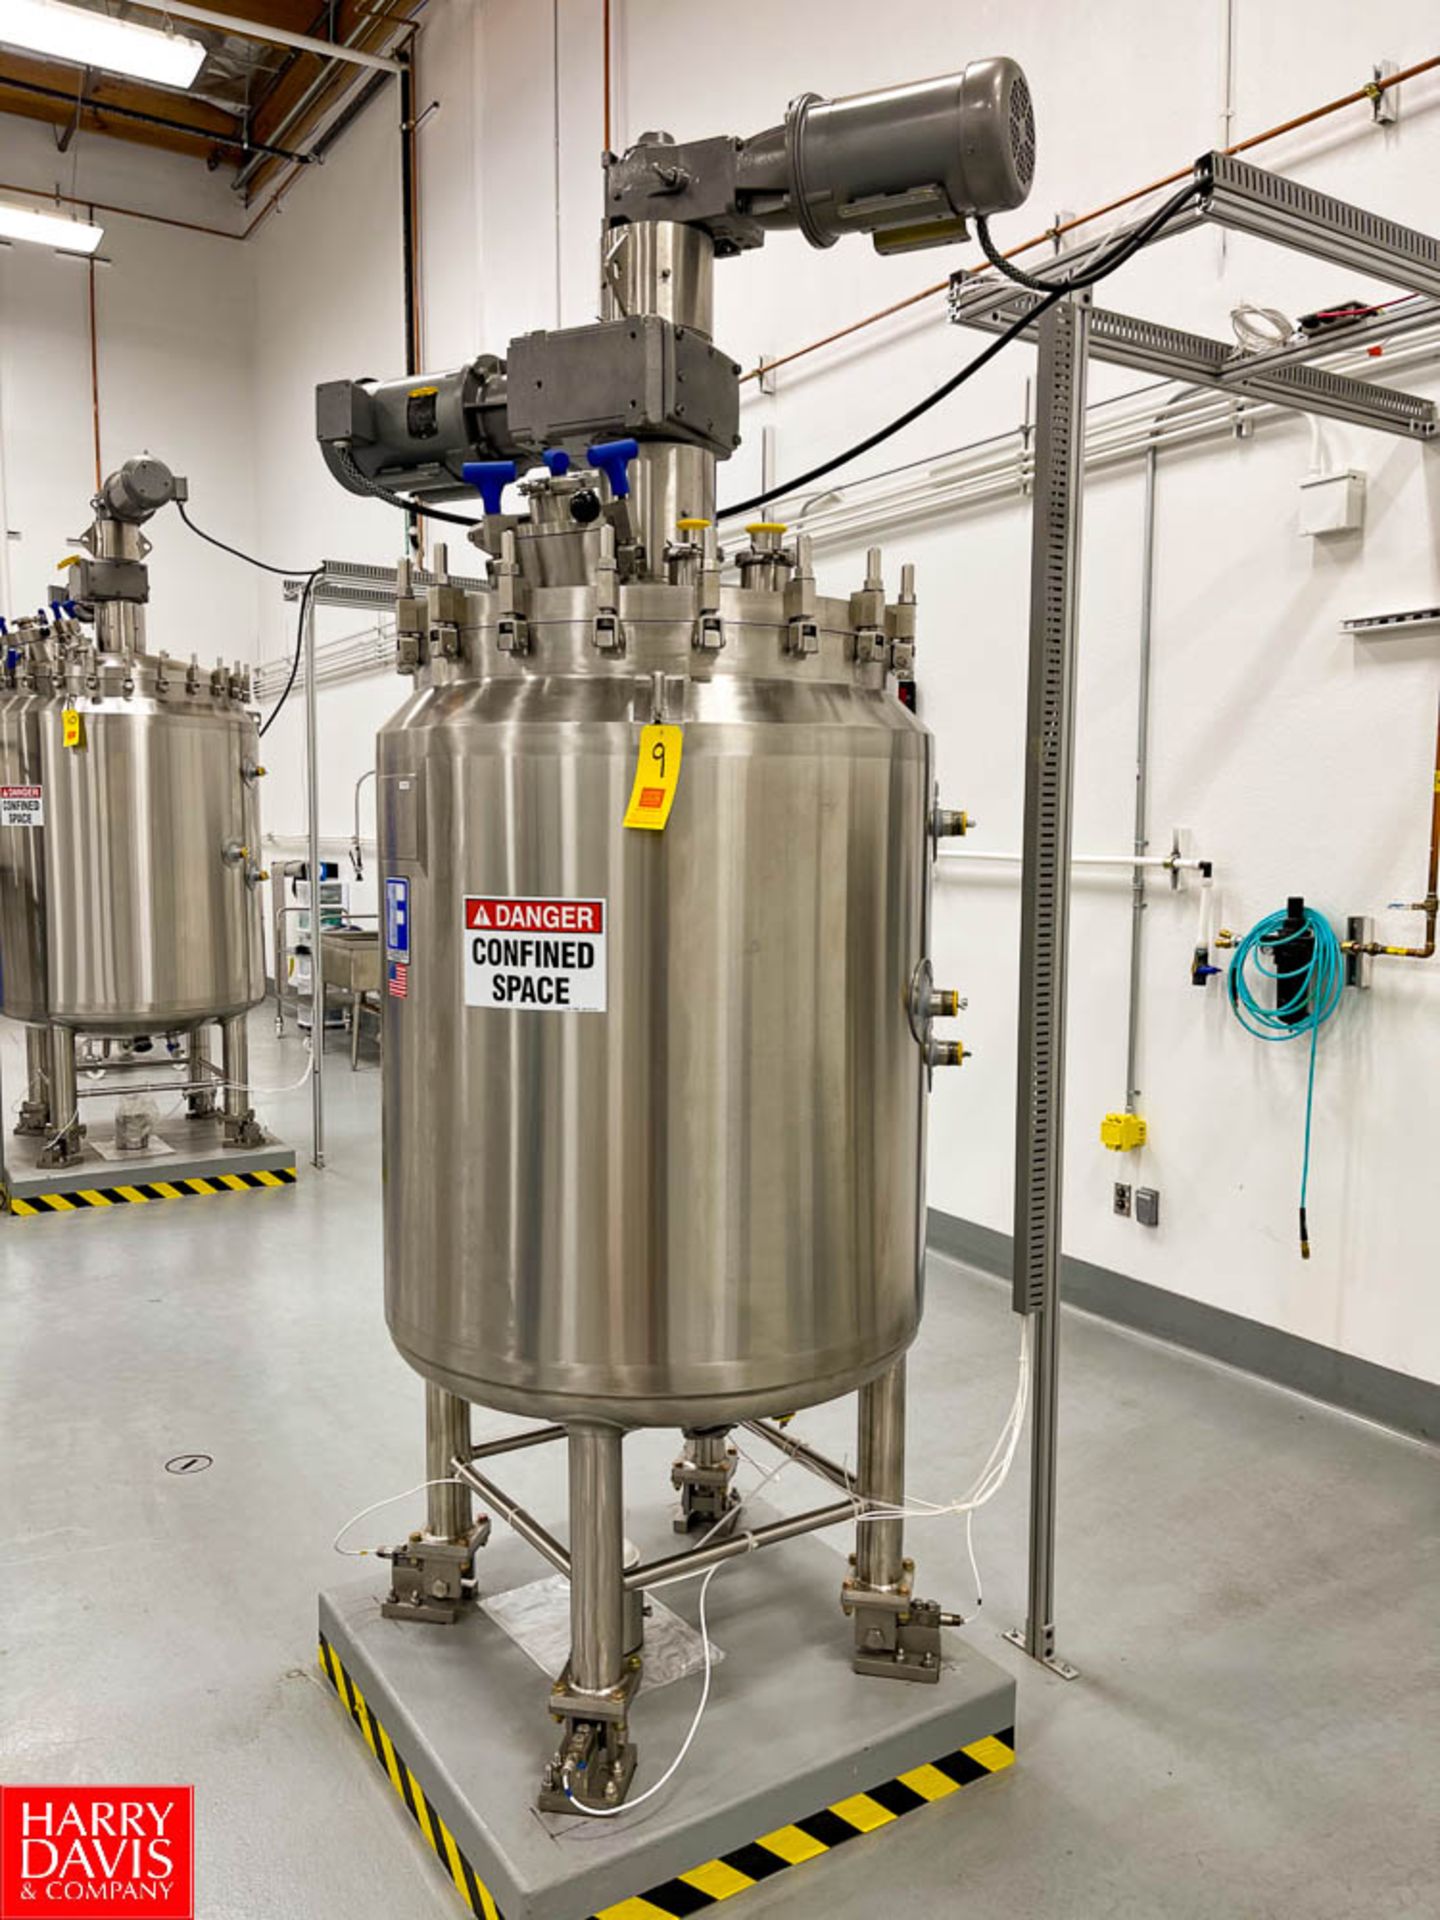 2019 Feldmeier 120 Gallon Vacuum-Jacketed Dome-Top 316L S/S Tank : SN 19EO437, Mounted on Load Cells - Image 6 of 10